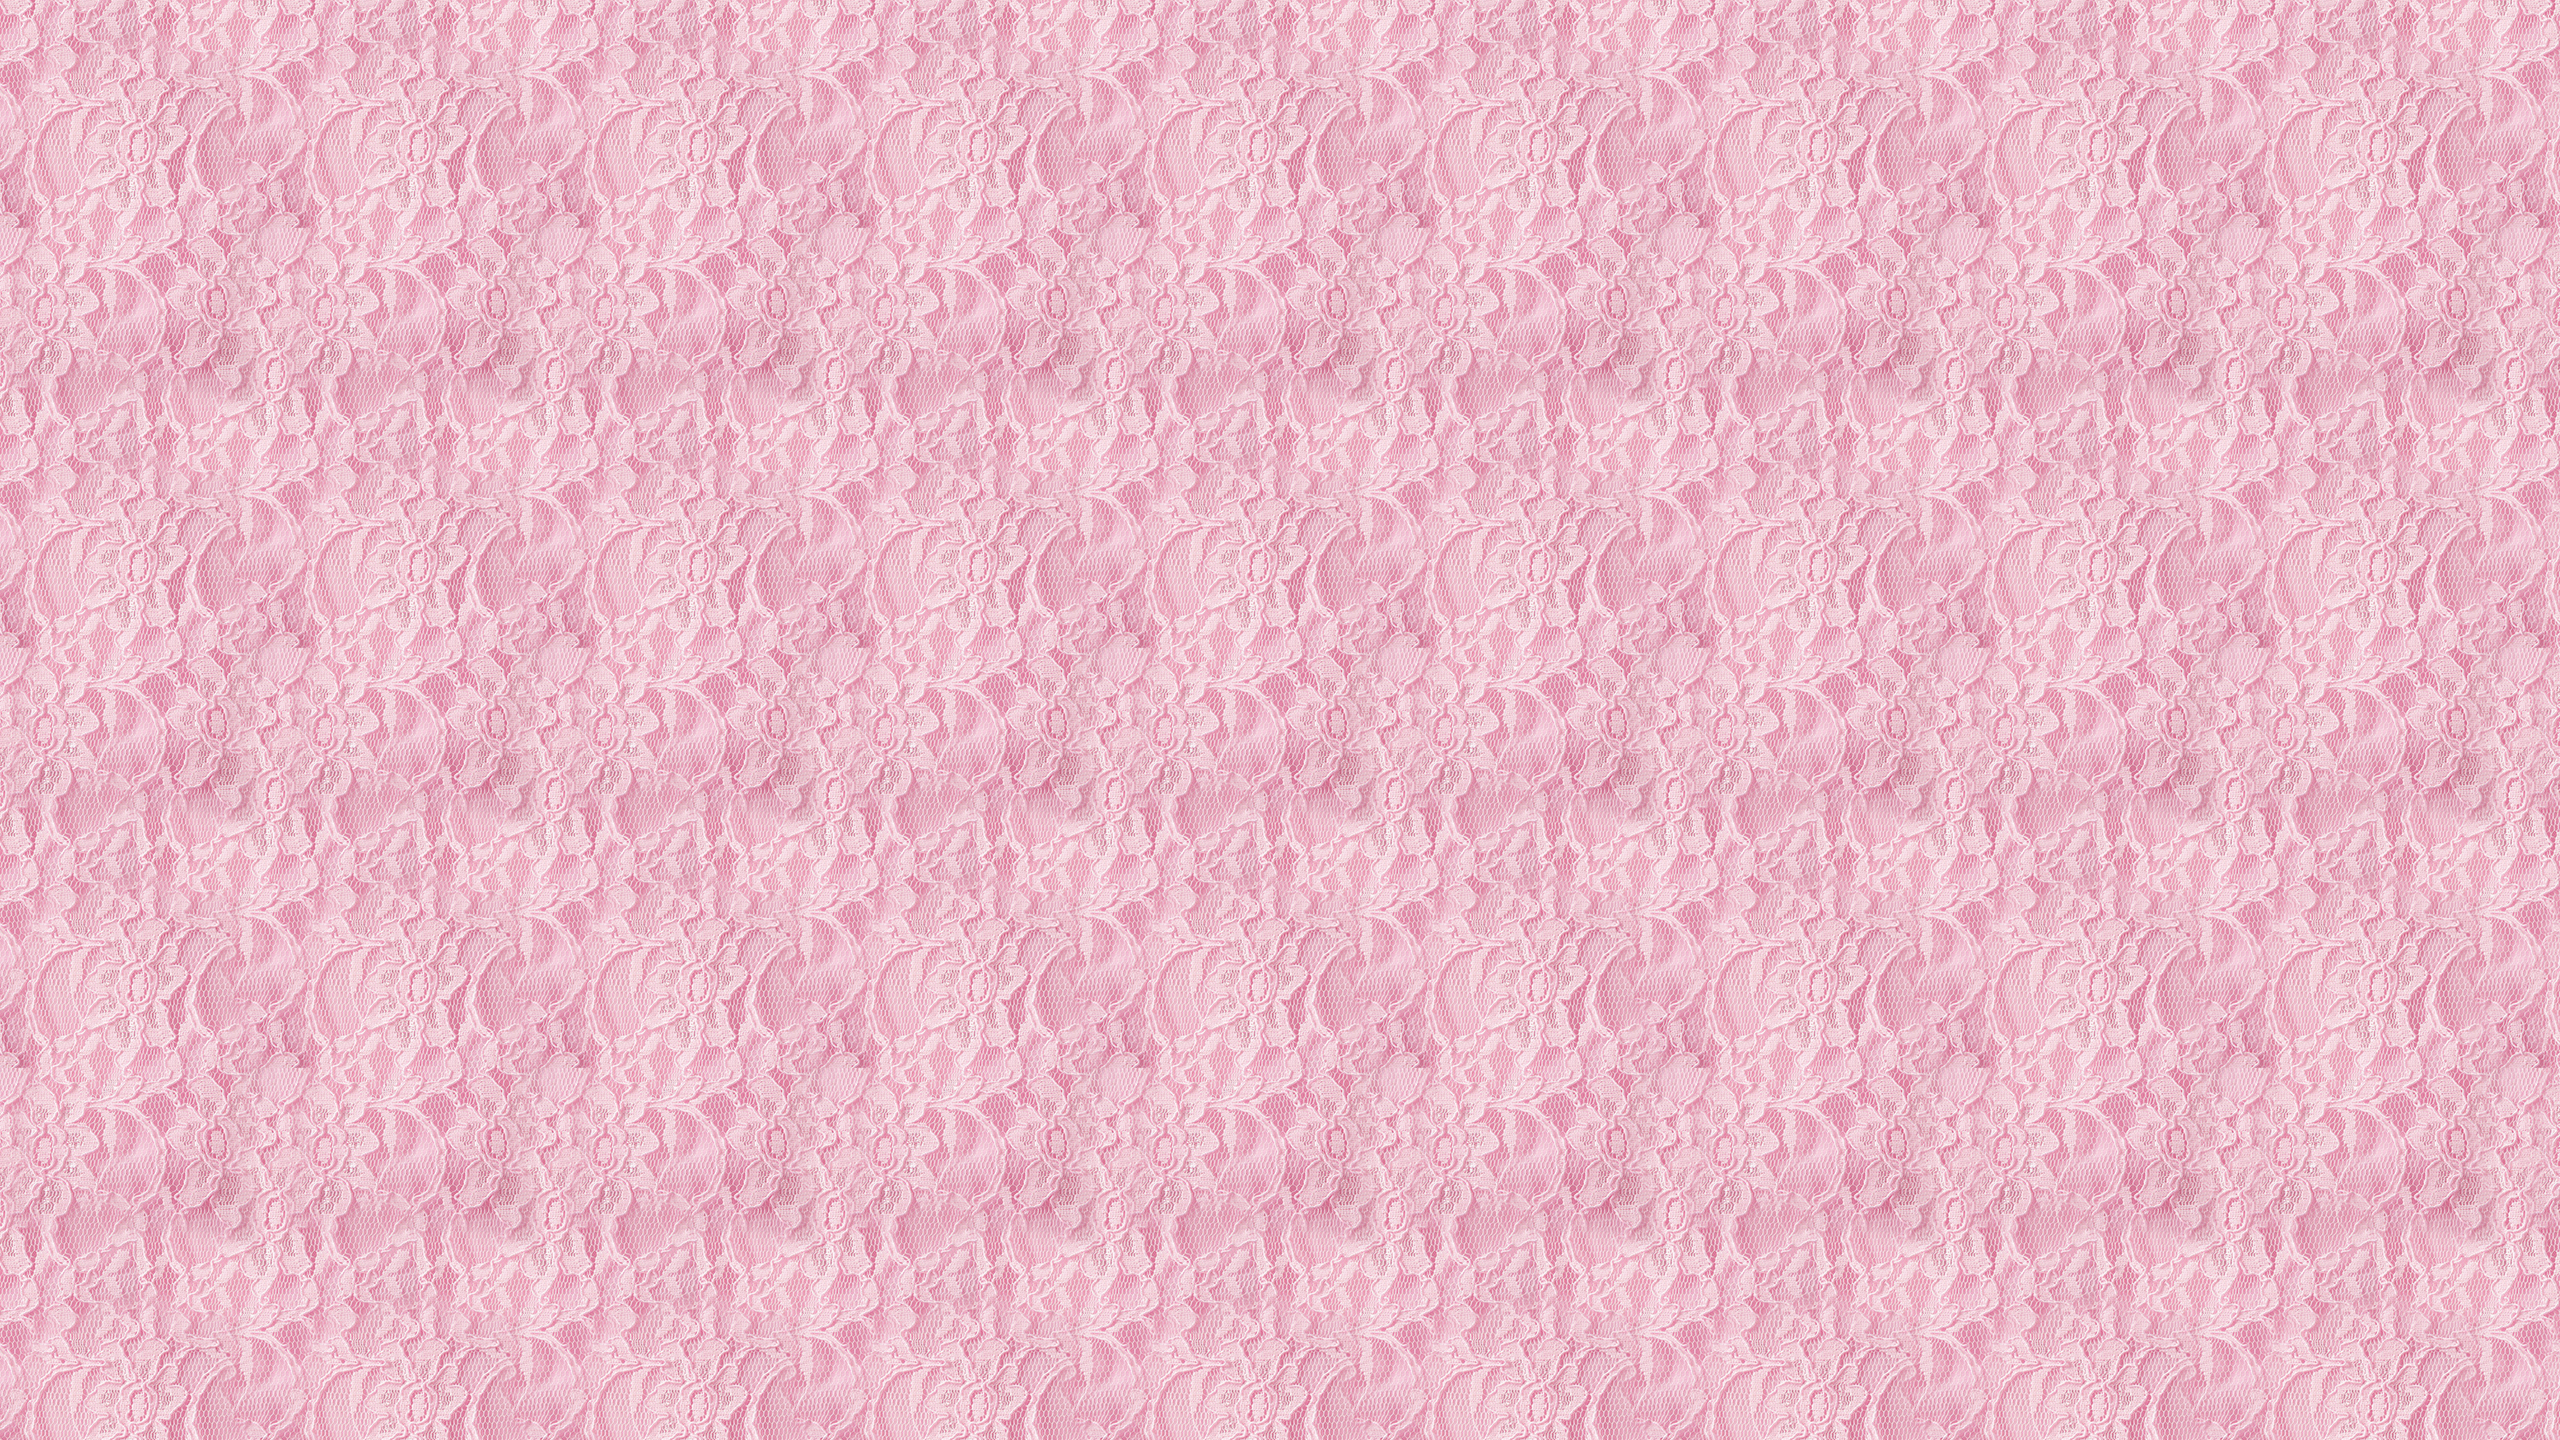 This Pink Lace Desktop Wallpaper Is Easy - Carmine , HD Wallpaper & Backgrounds